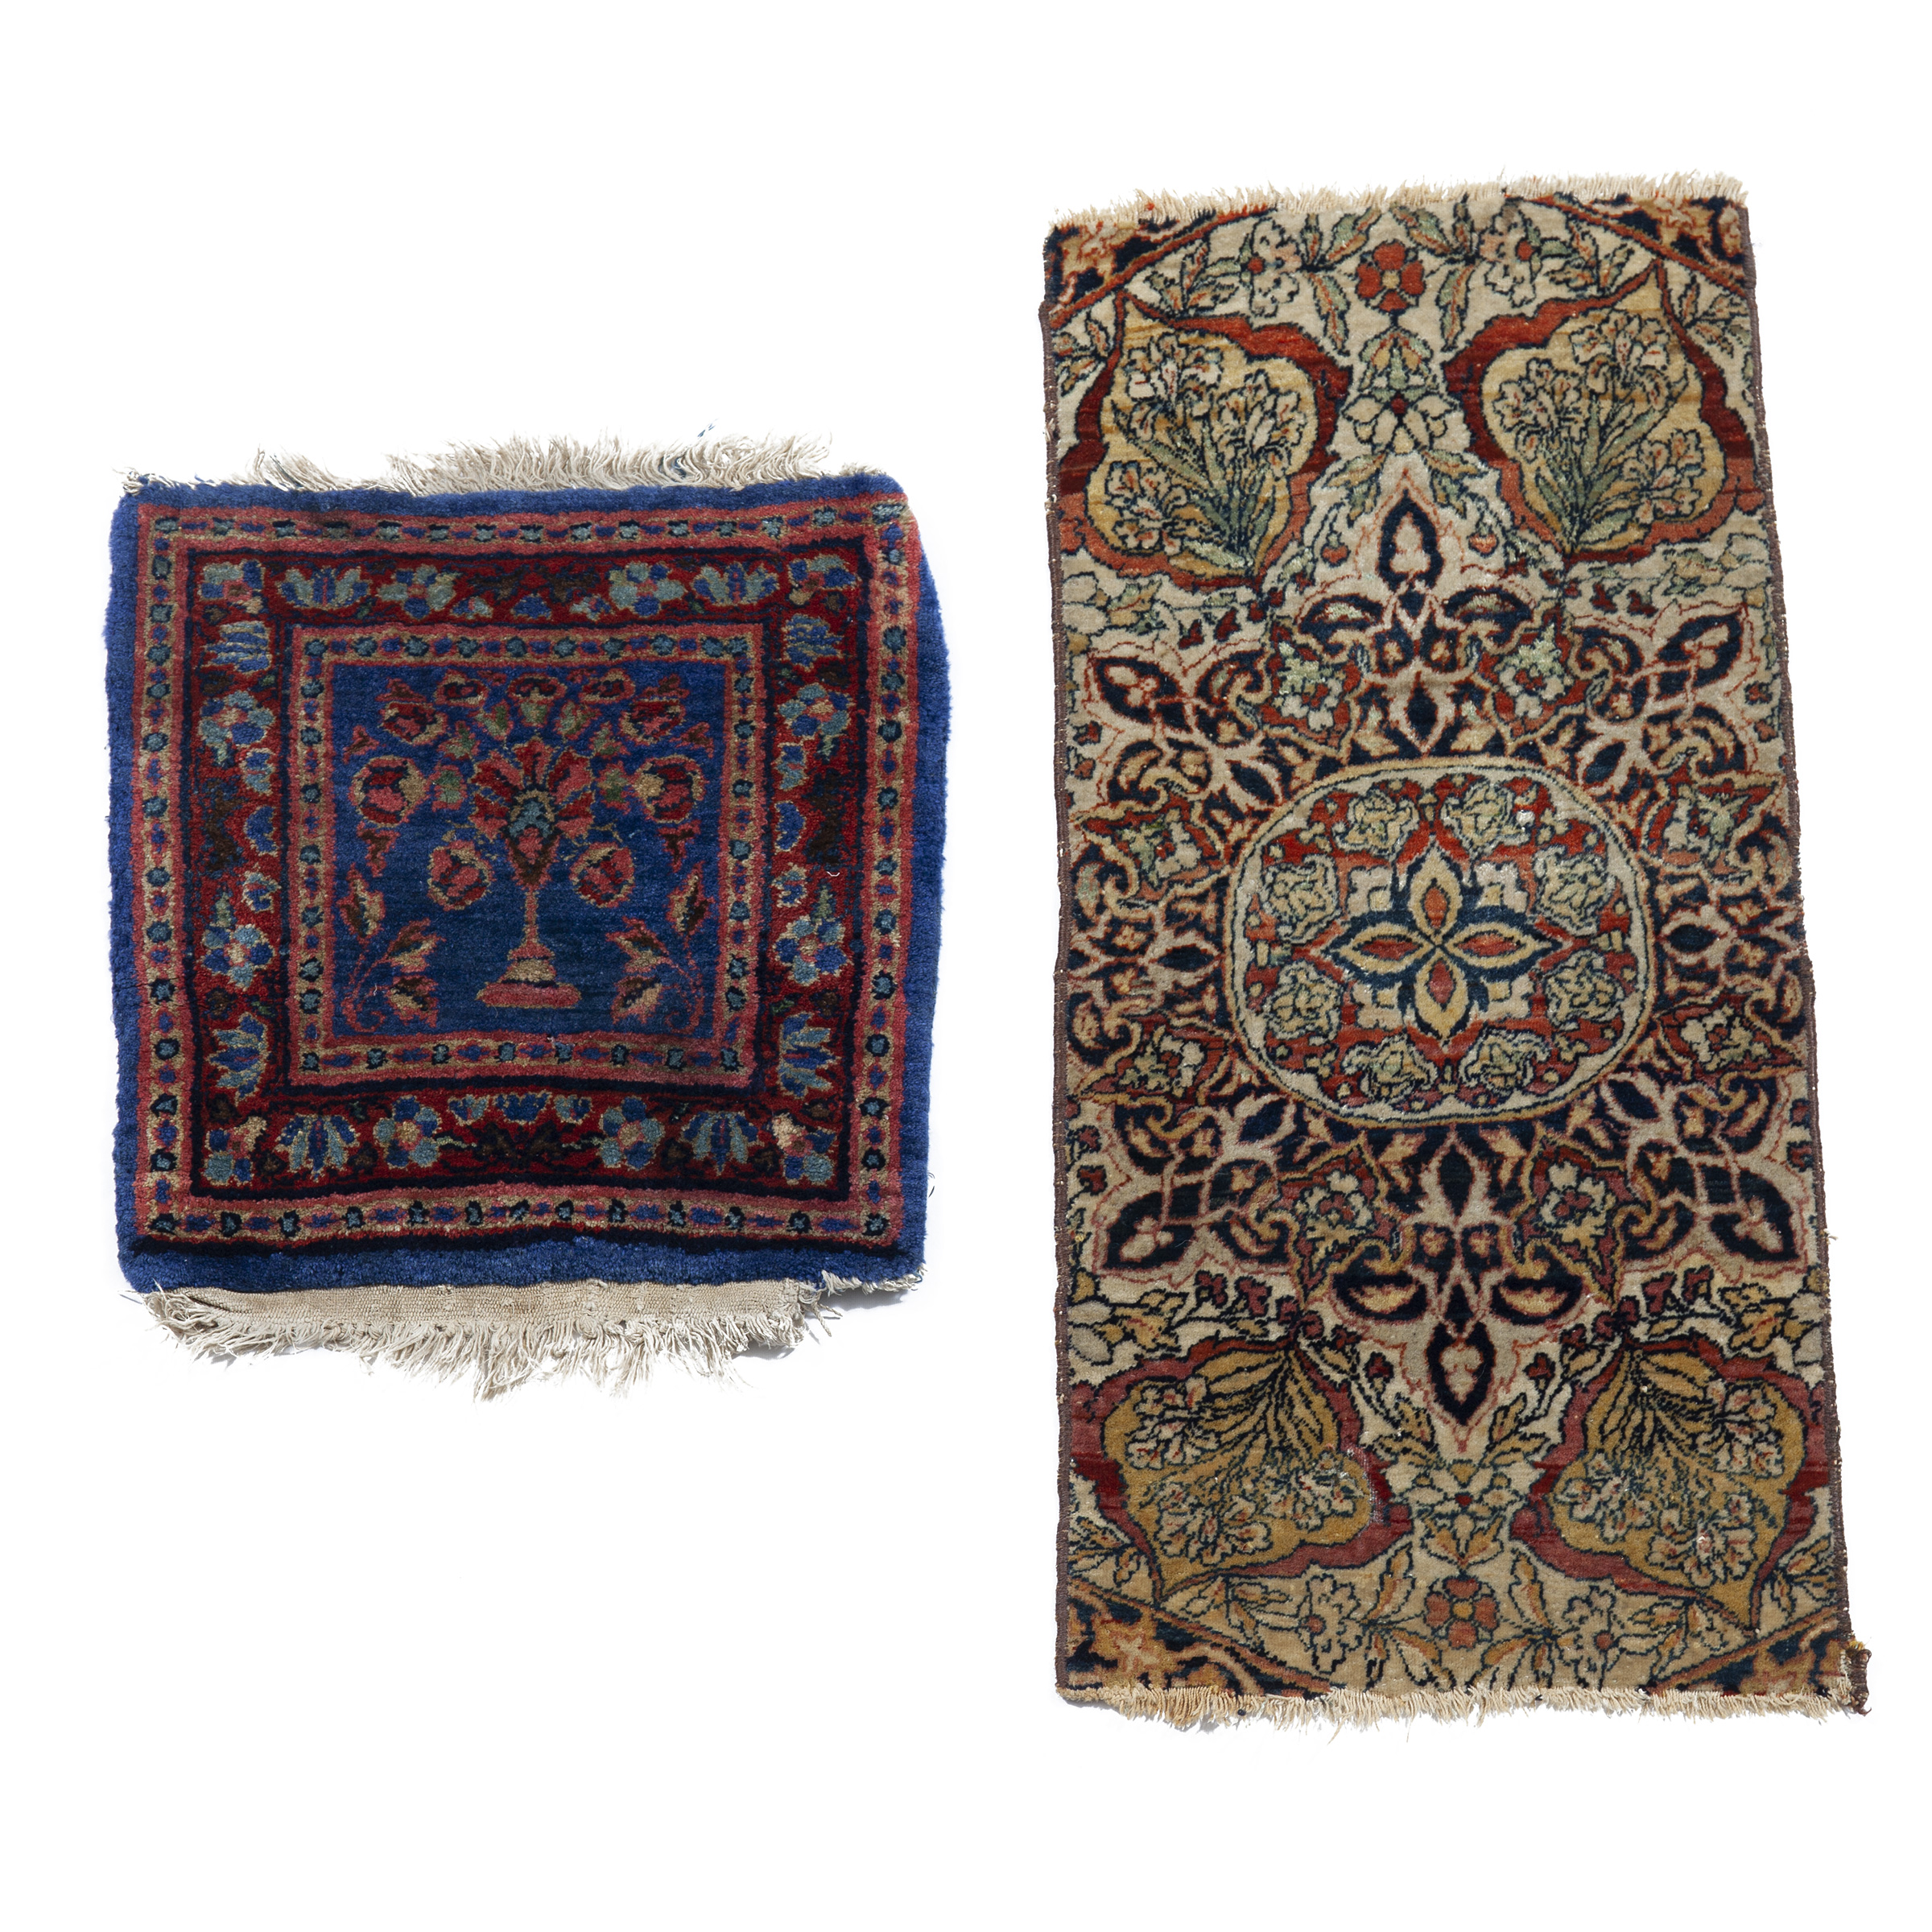 Sarouk Mat together with a Laver Kerman Fragment, Persian,  early 20th century